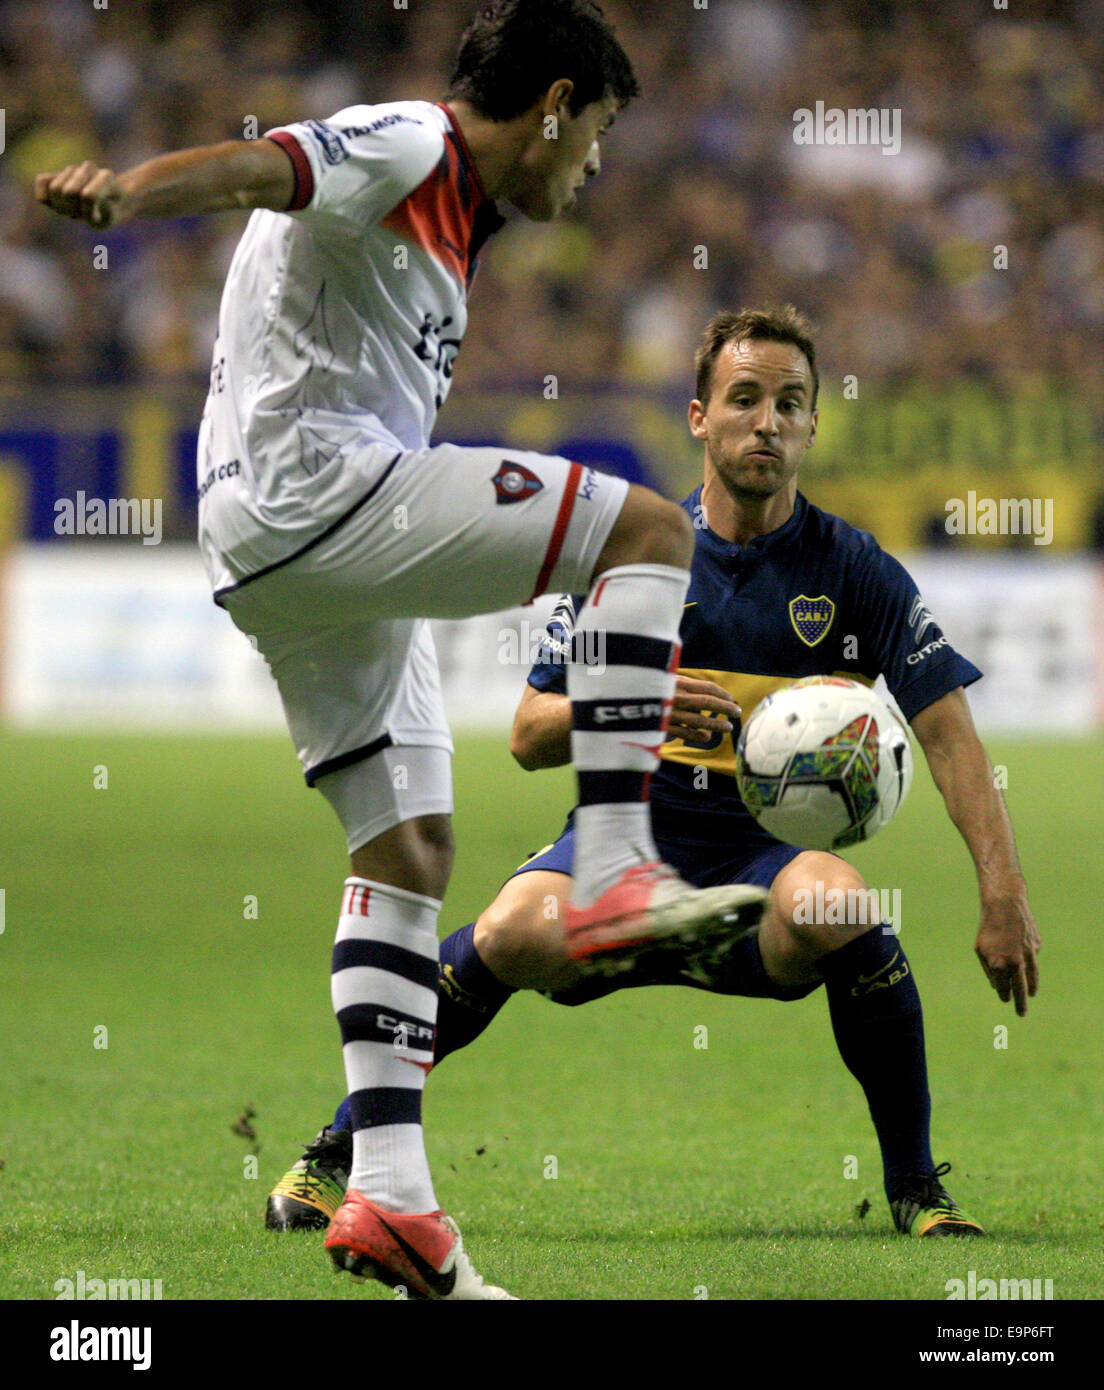 Buenos Aires, Argentina. 30th Oct, 2014. Jose Fuenzalida (R) of Argentina's Boca Juniors vies with Cesar Benitez of Paraguay's Cerro Porteno during the first leg of the quarterfinals of the South American Cup at Alberto J. Armando stadium in Buenos Aires city, Argentina, on Oct. 30, 2014. Credit:  Martin Zabala/Xinhua/Alamy Live News Stock Photo